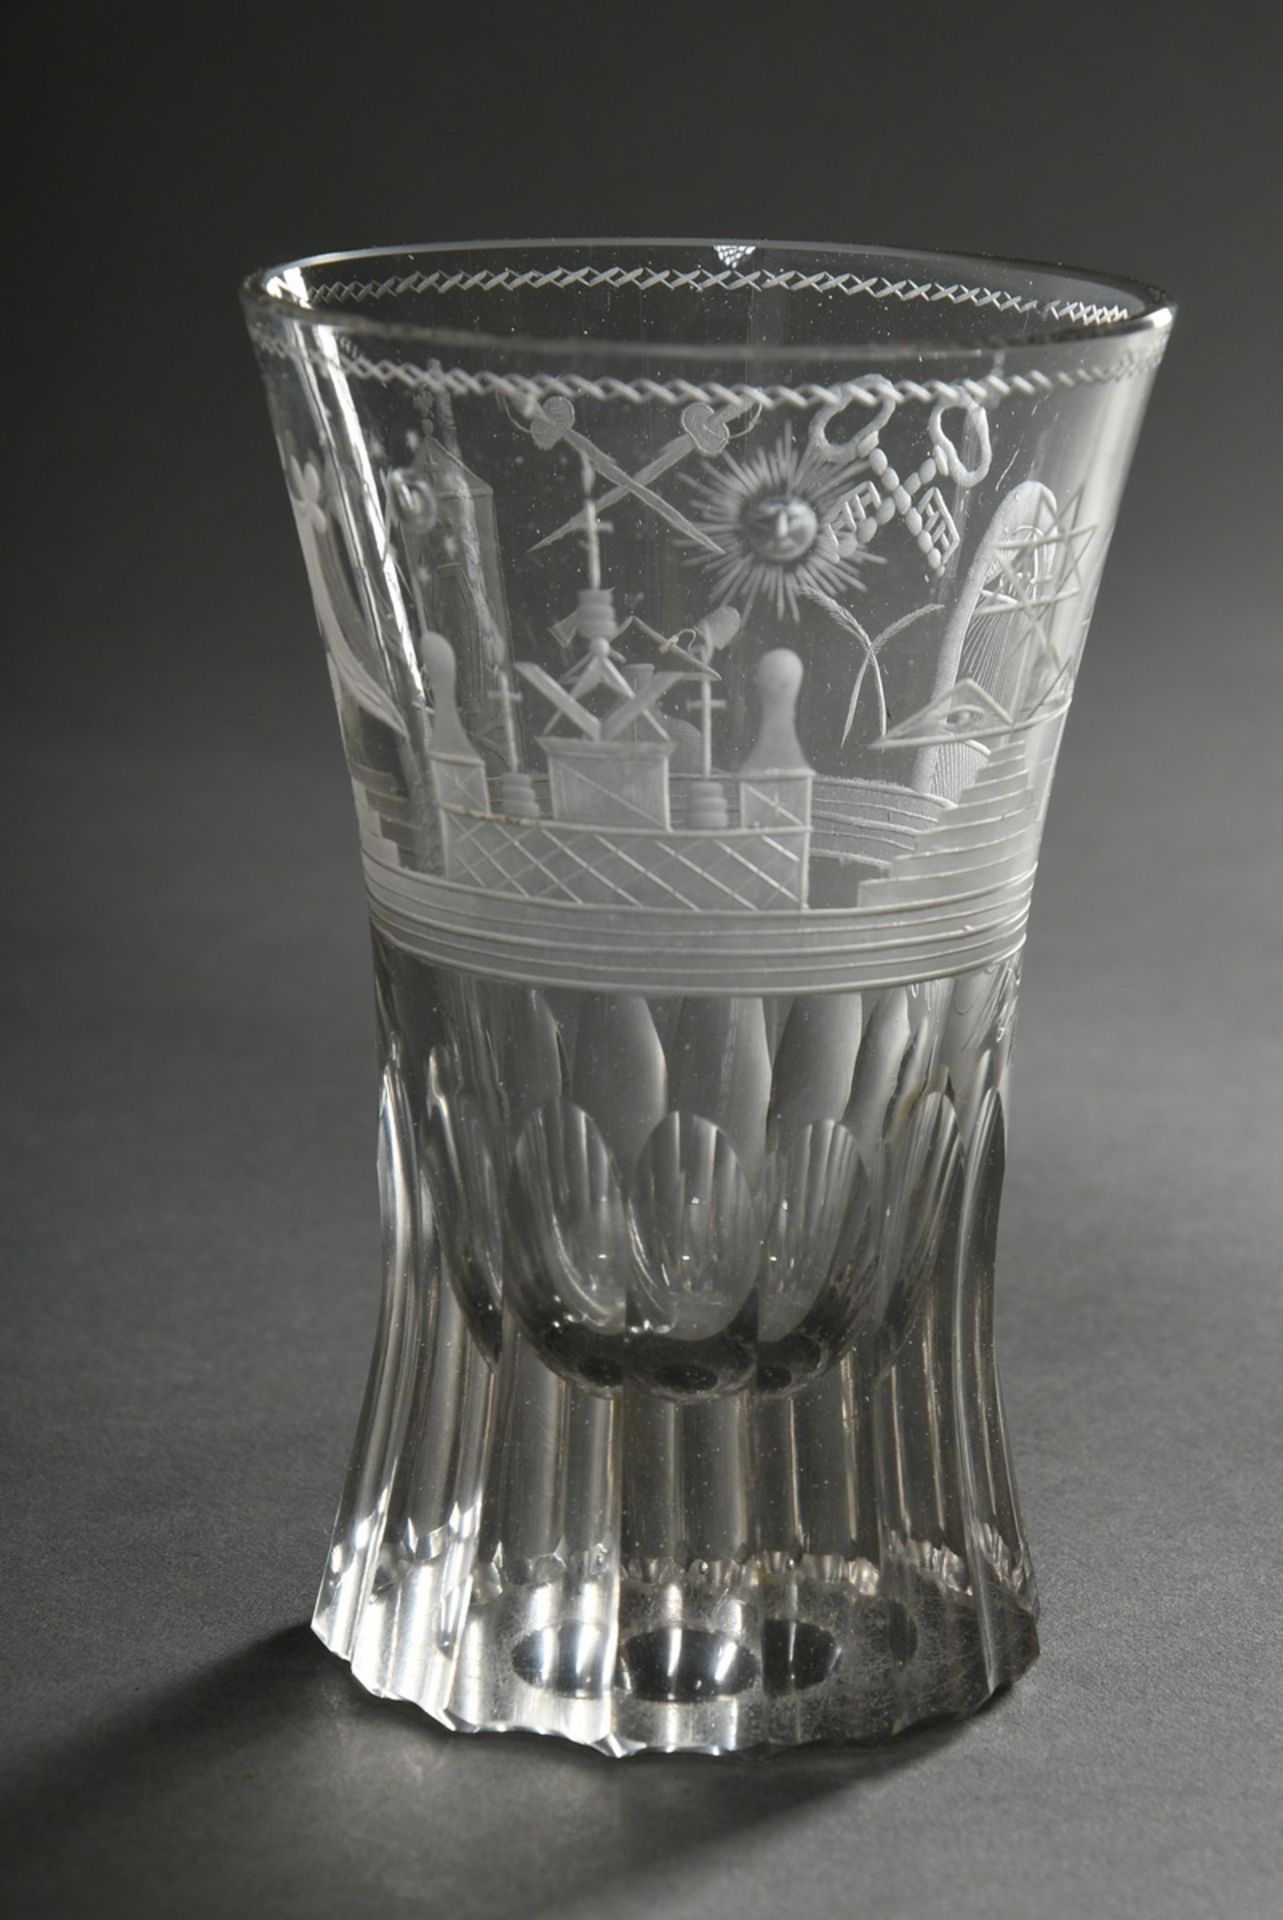 Masonic glass with surrounding border, rich mat and blank cut symbolism as well as 16-pass notch fa - Image 2 of 5